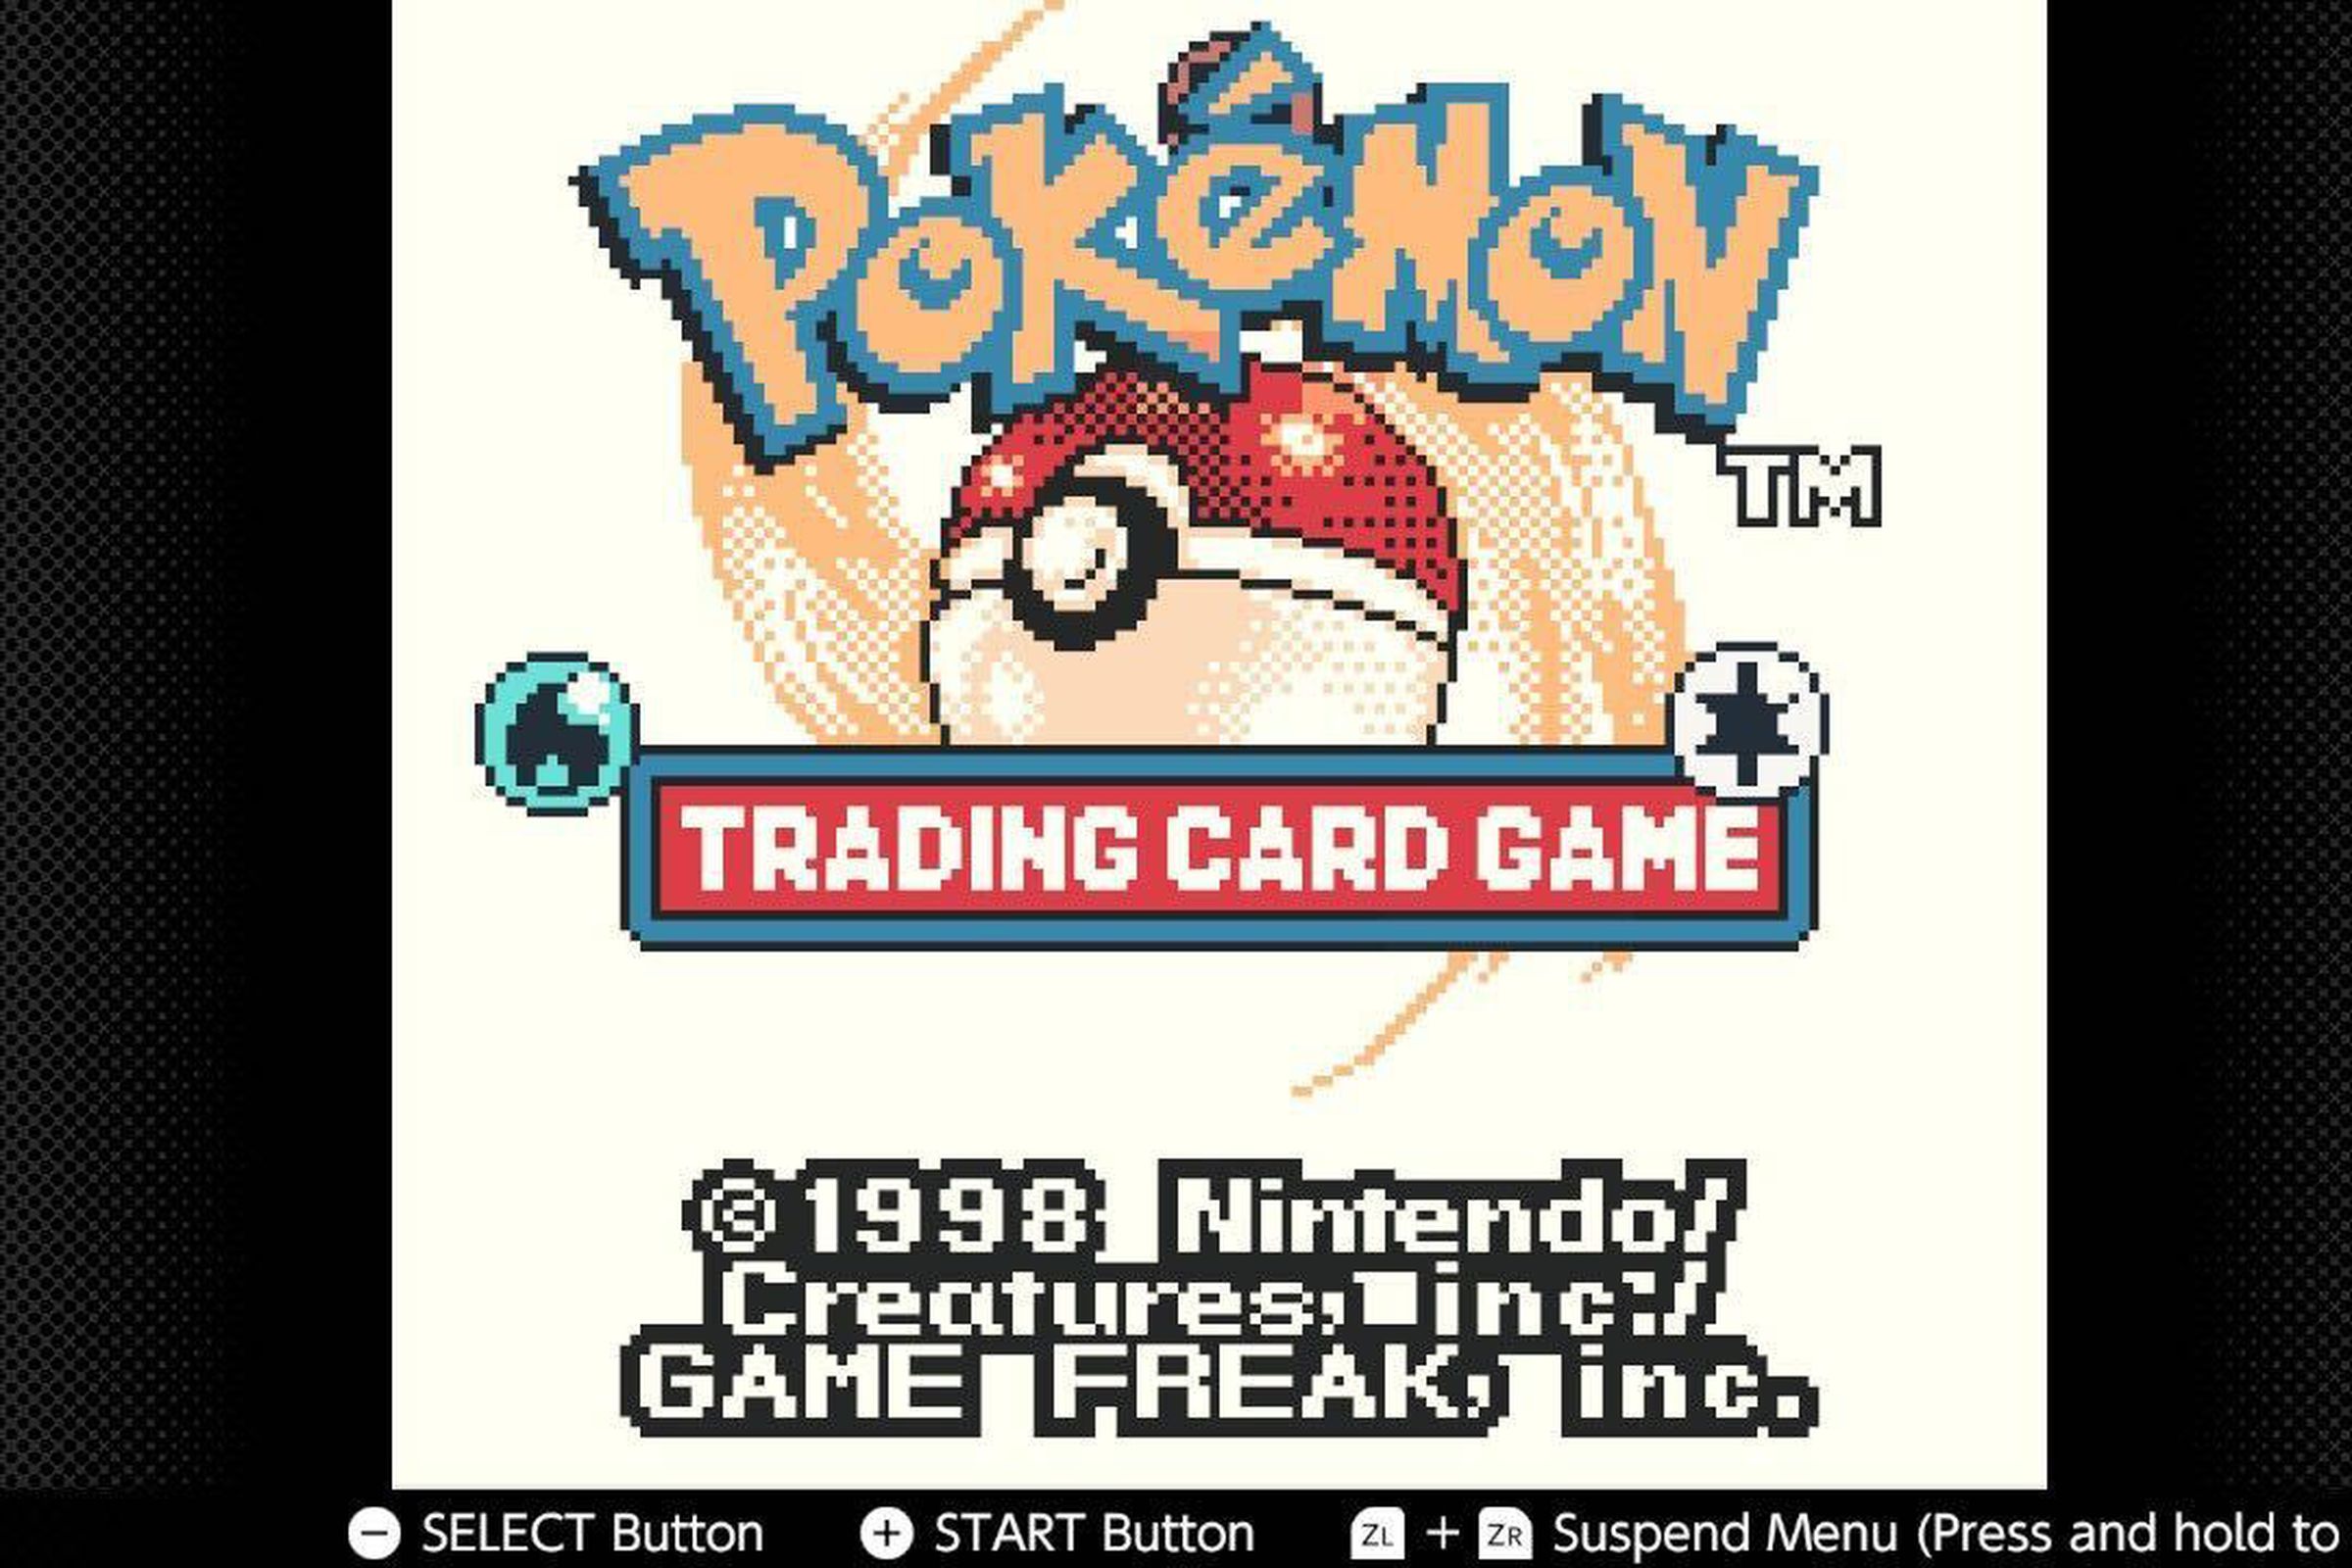 Screenshot featuring the start screen of Pokemon Trading Card Game on the Nintendo Switch Online subscription service